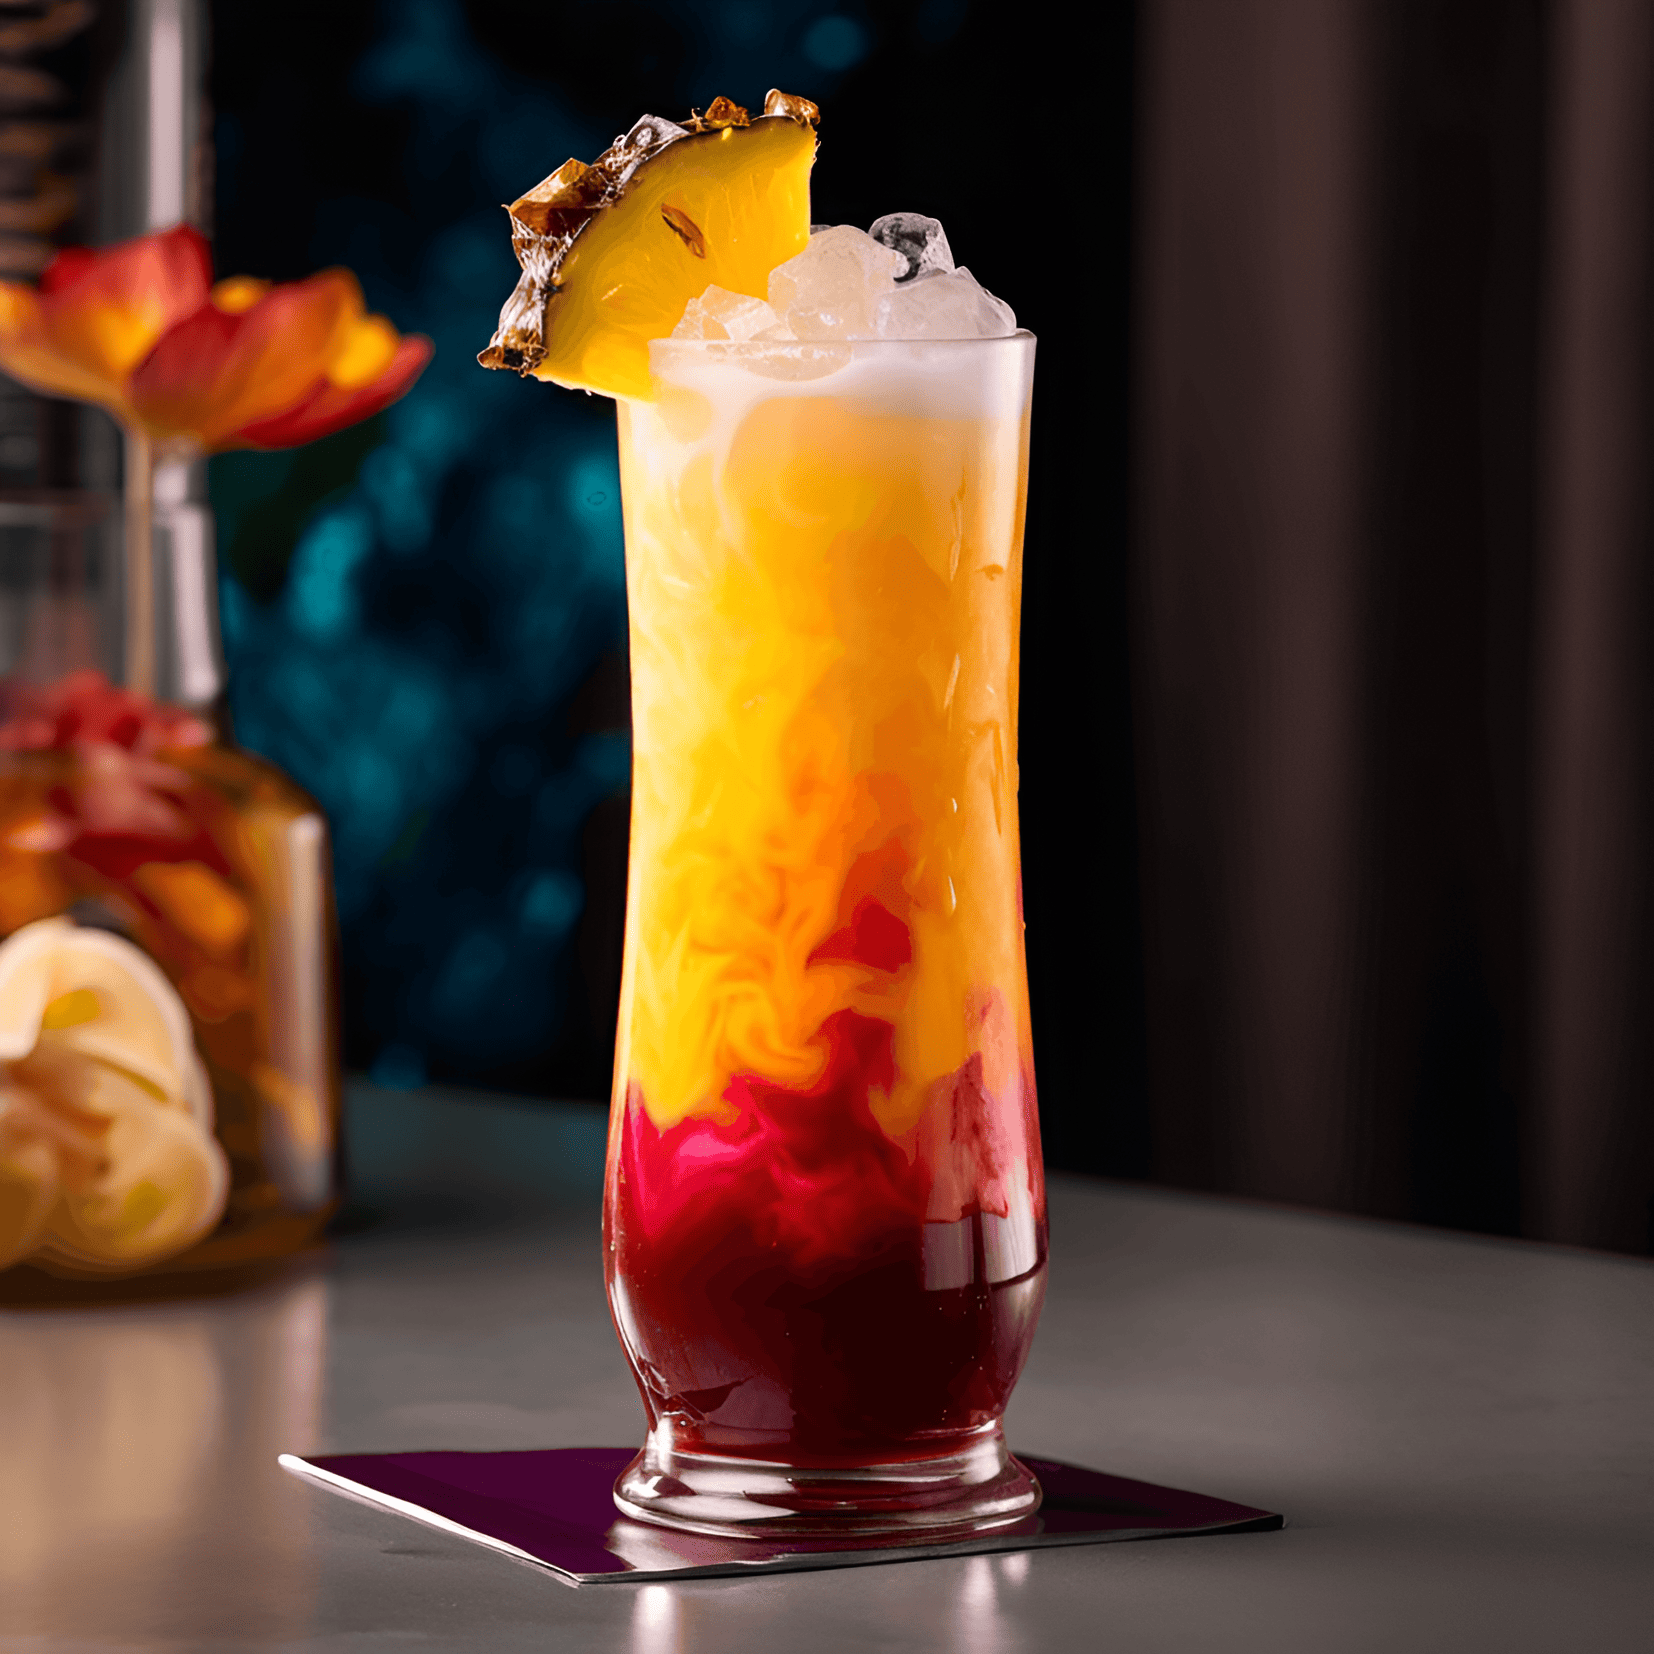 Toucan Cocktail Recipe - The Toucan cocktail is a delightful combination of sweet, sour, and fruity flavors. It is well-balanced, with a tangy citrus kick from the lime and orange juices, and a sweet, tropical taste from the pineapple juice and grenadine. The rum adds a smooth, rich depth to the drink, making it both refreshing and satisfying.